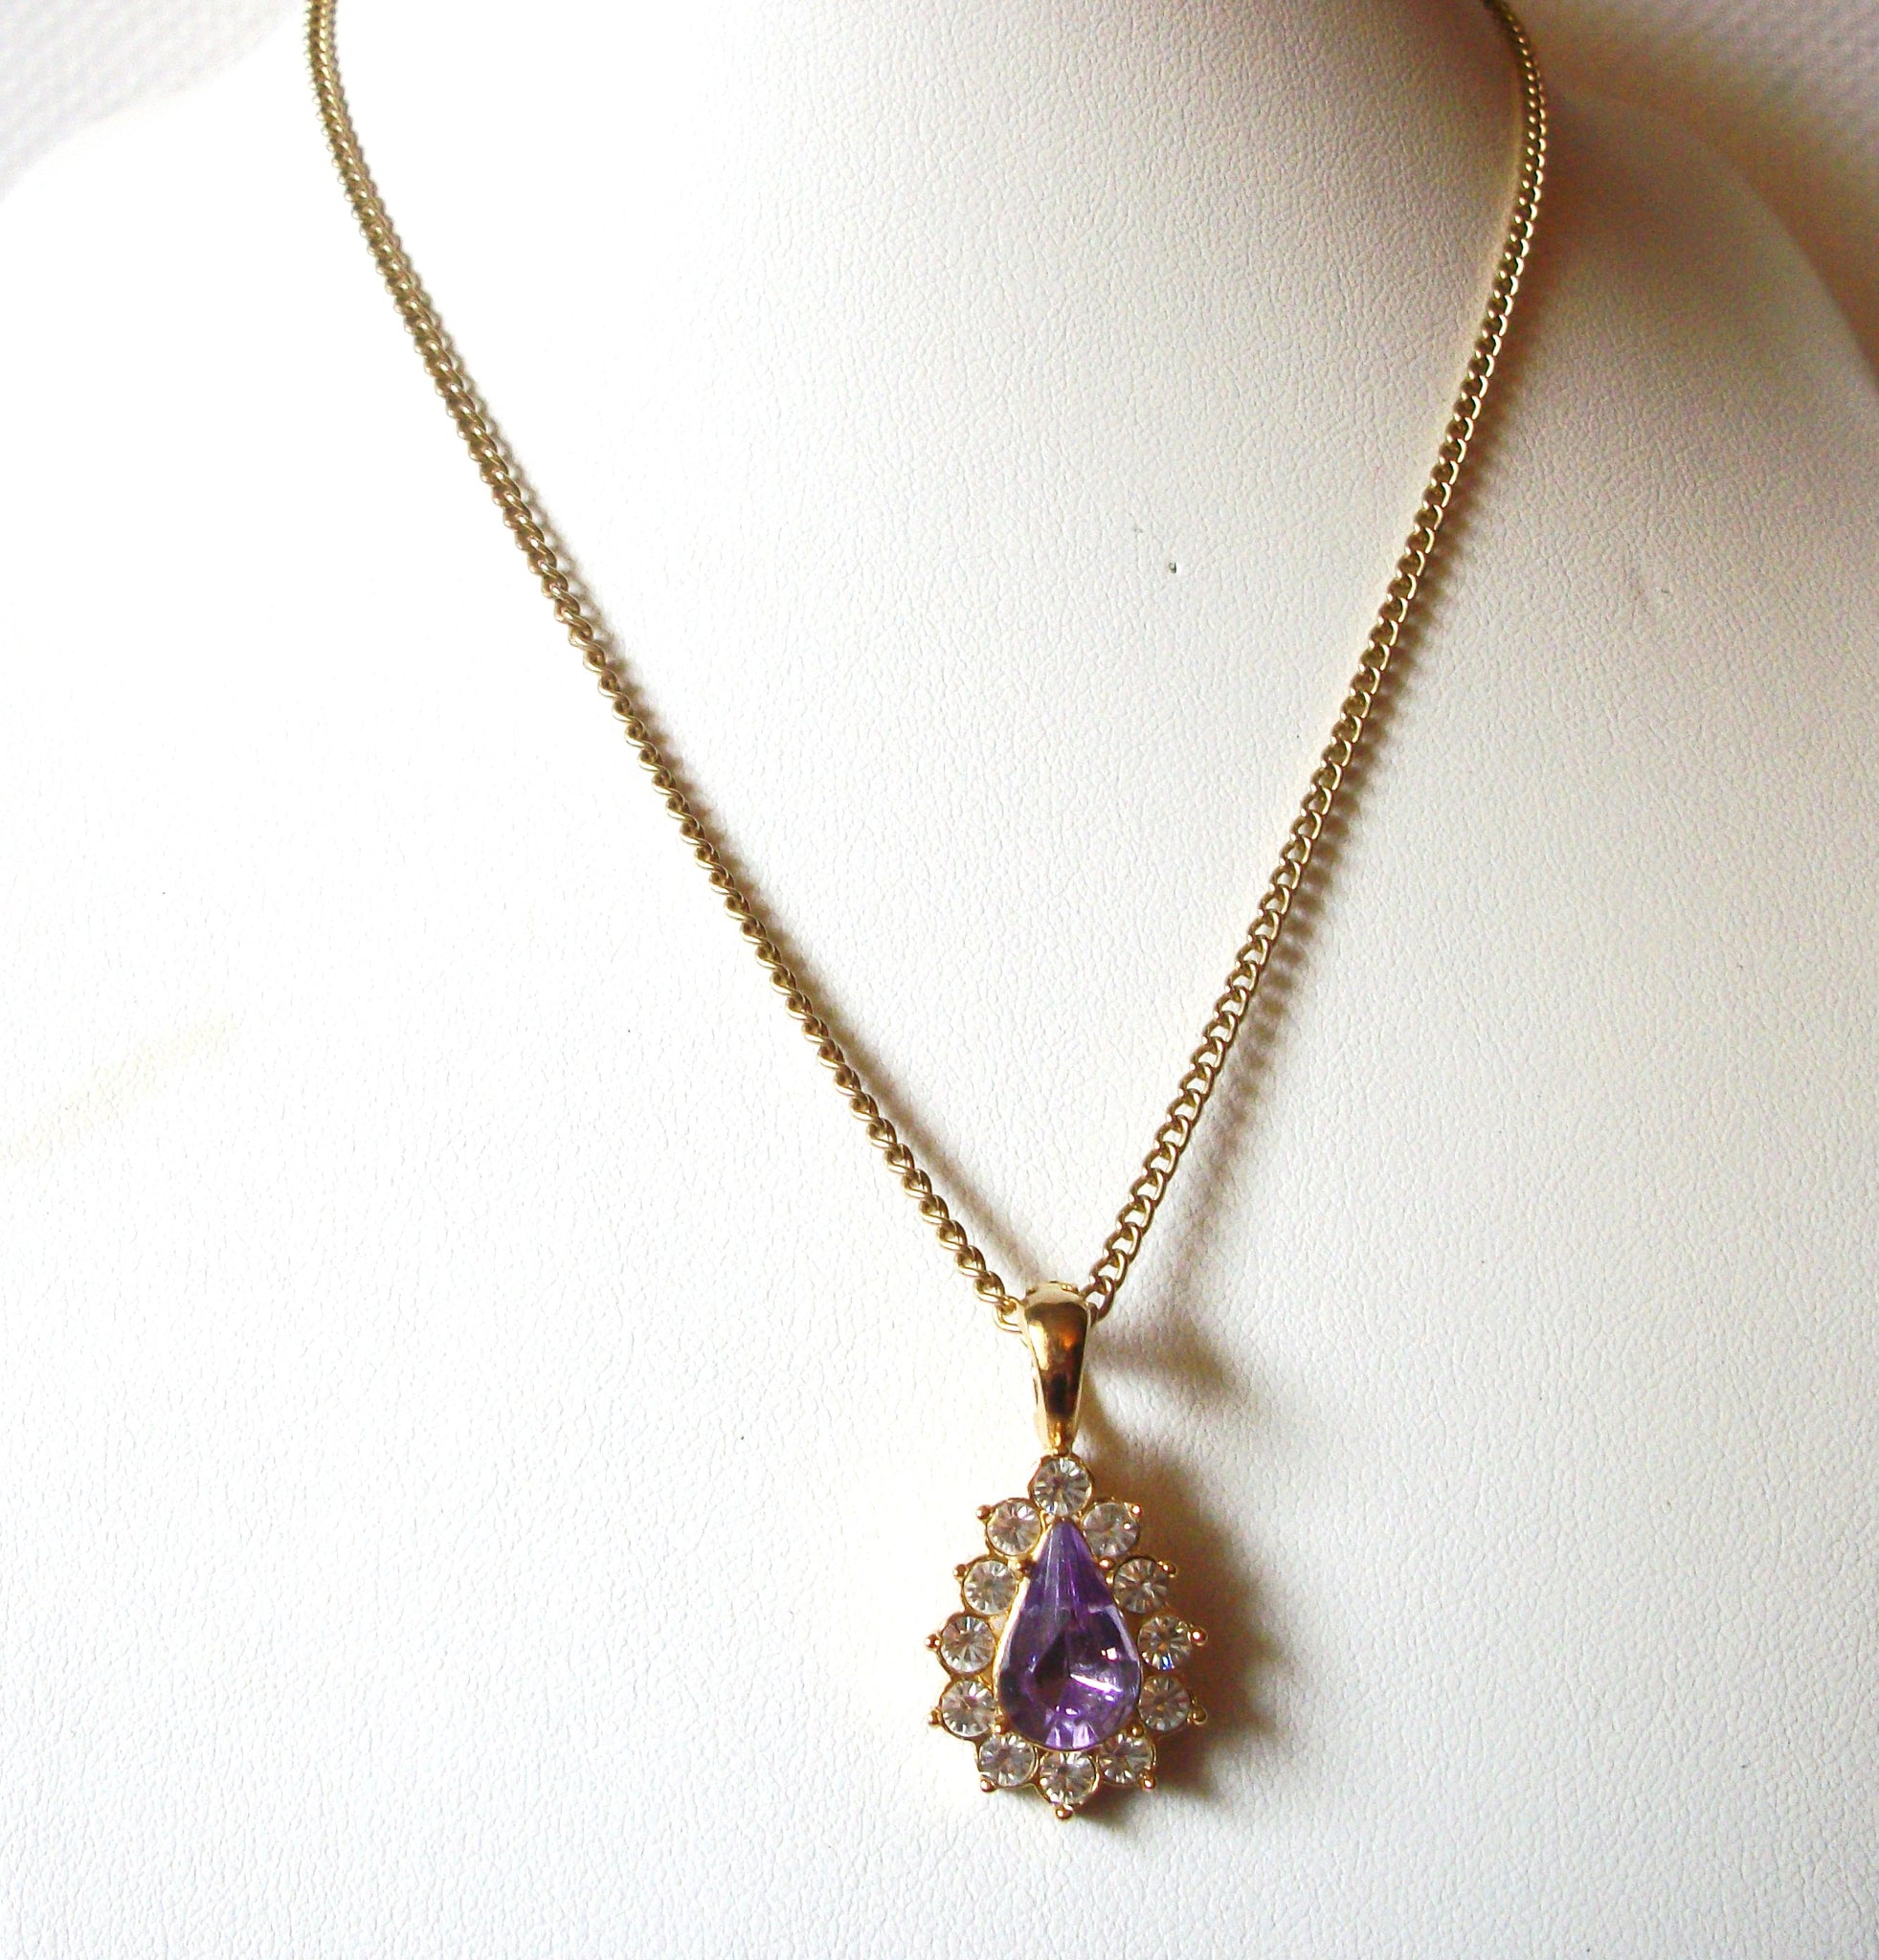 Vintage Gold Toned Amethyst Clear Rhinestone Pendant Necklace 9216